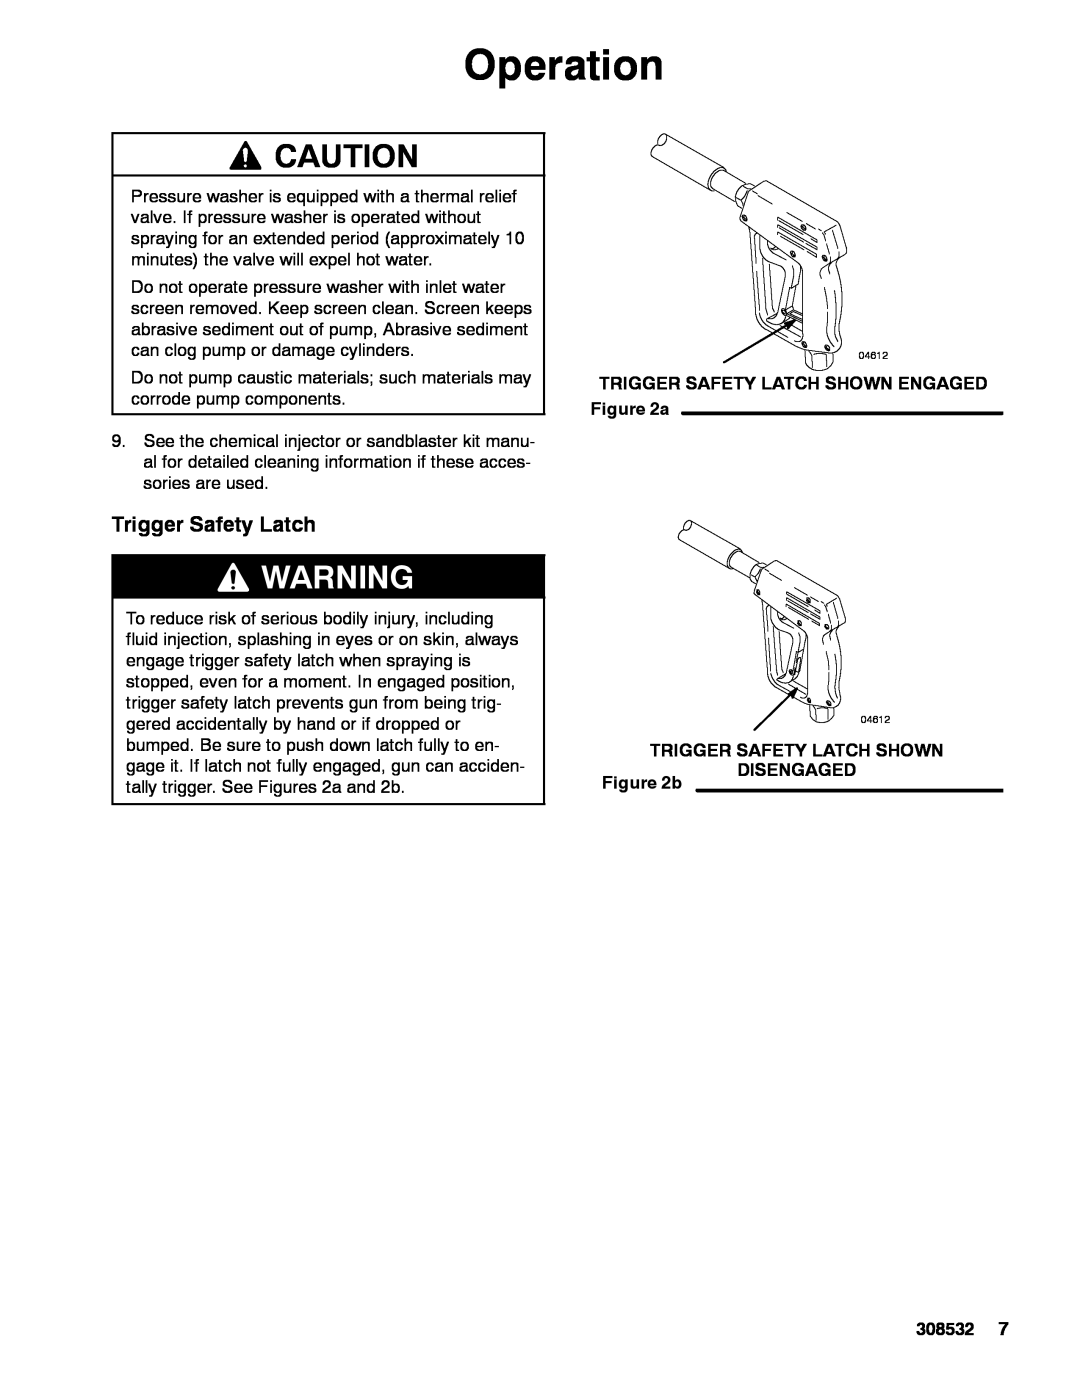 Graco Inc 4043, 308532S important safety instructions Trigger Safety Latch, Operation 